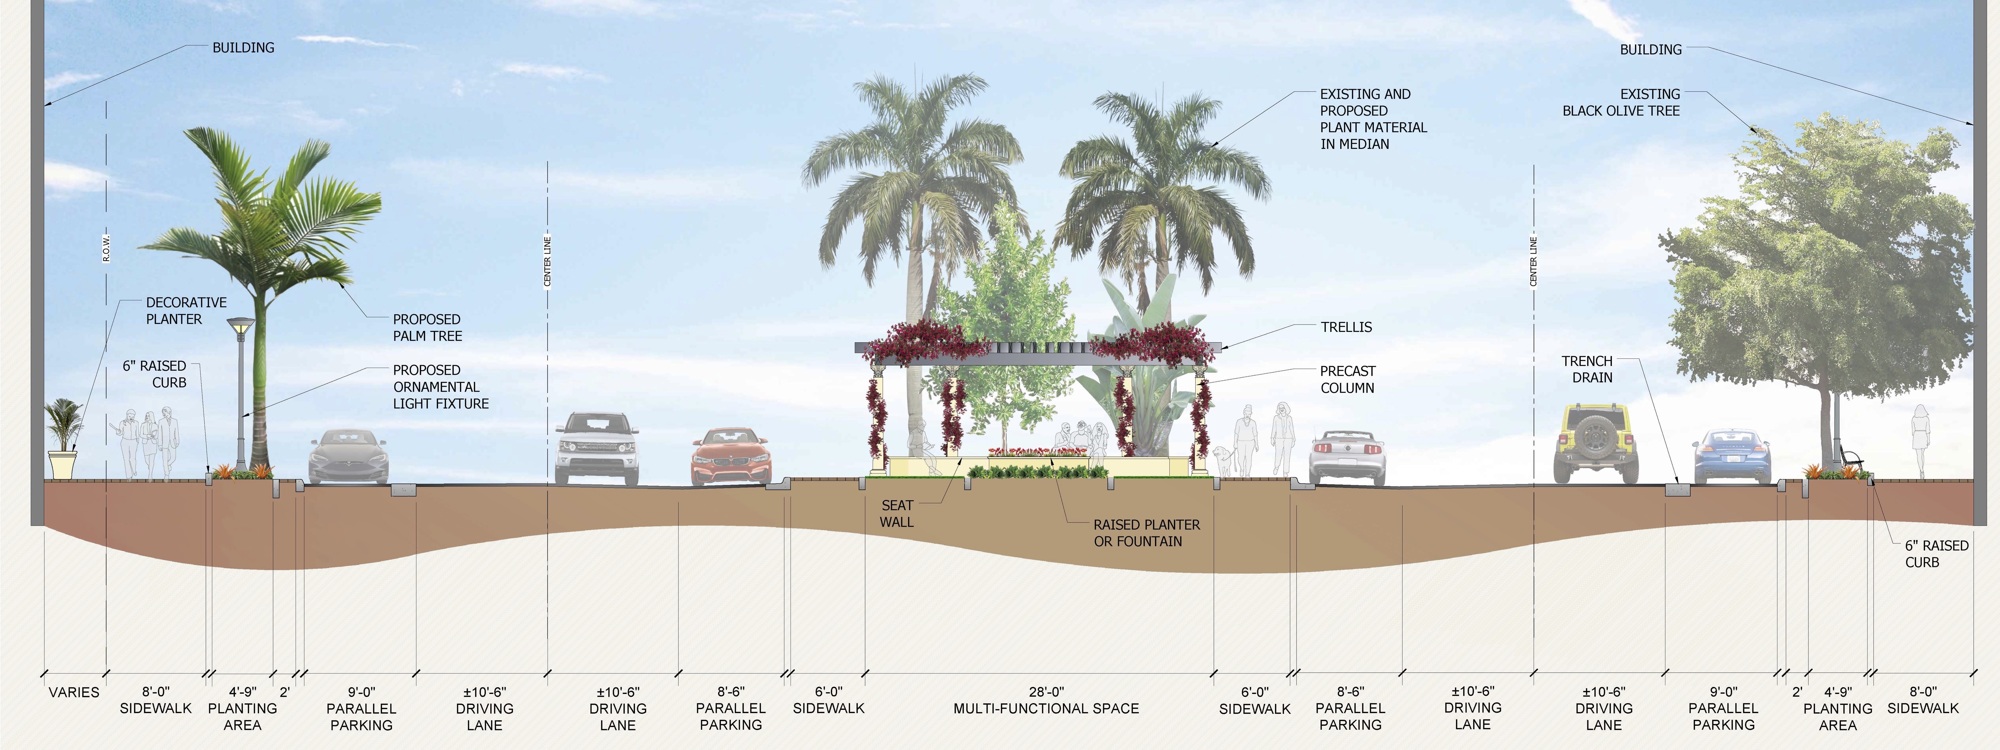 Phil Smith's concept design for a St. Armands streetscape project would involve changes to the sidewalks, medians and portions of the roadway. Any changes would require approval from the city and state. Image via city of Sarasota.